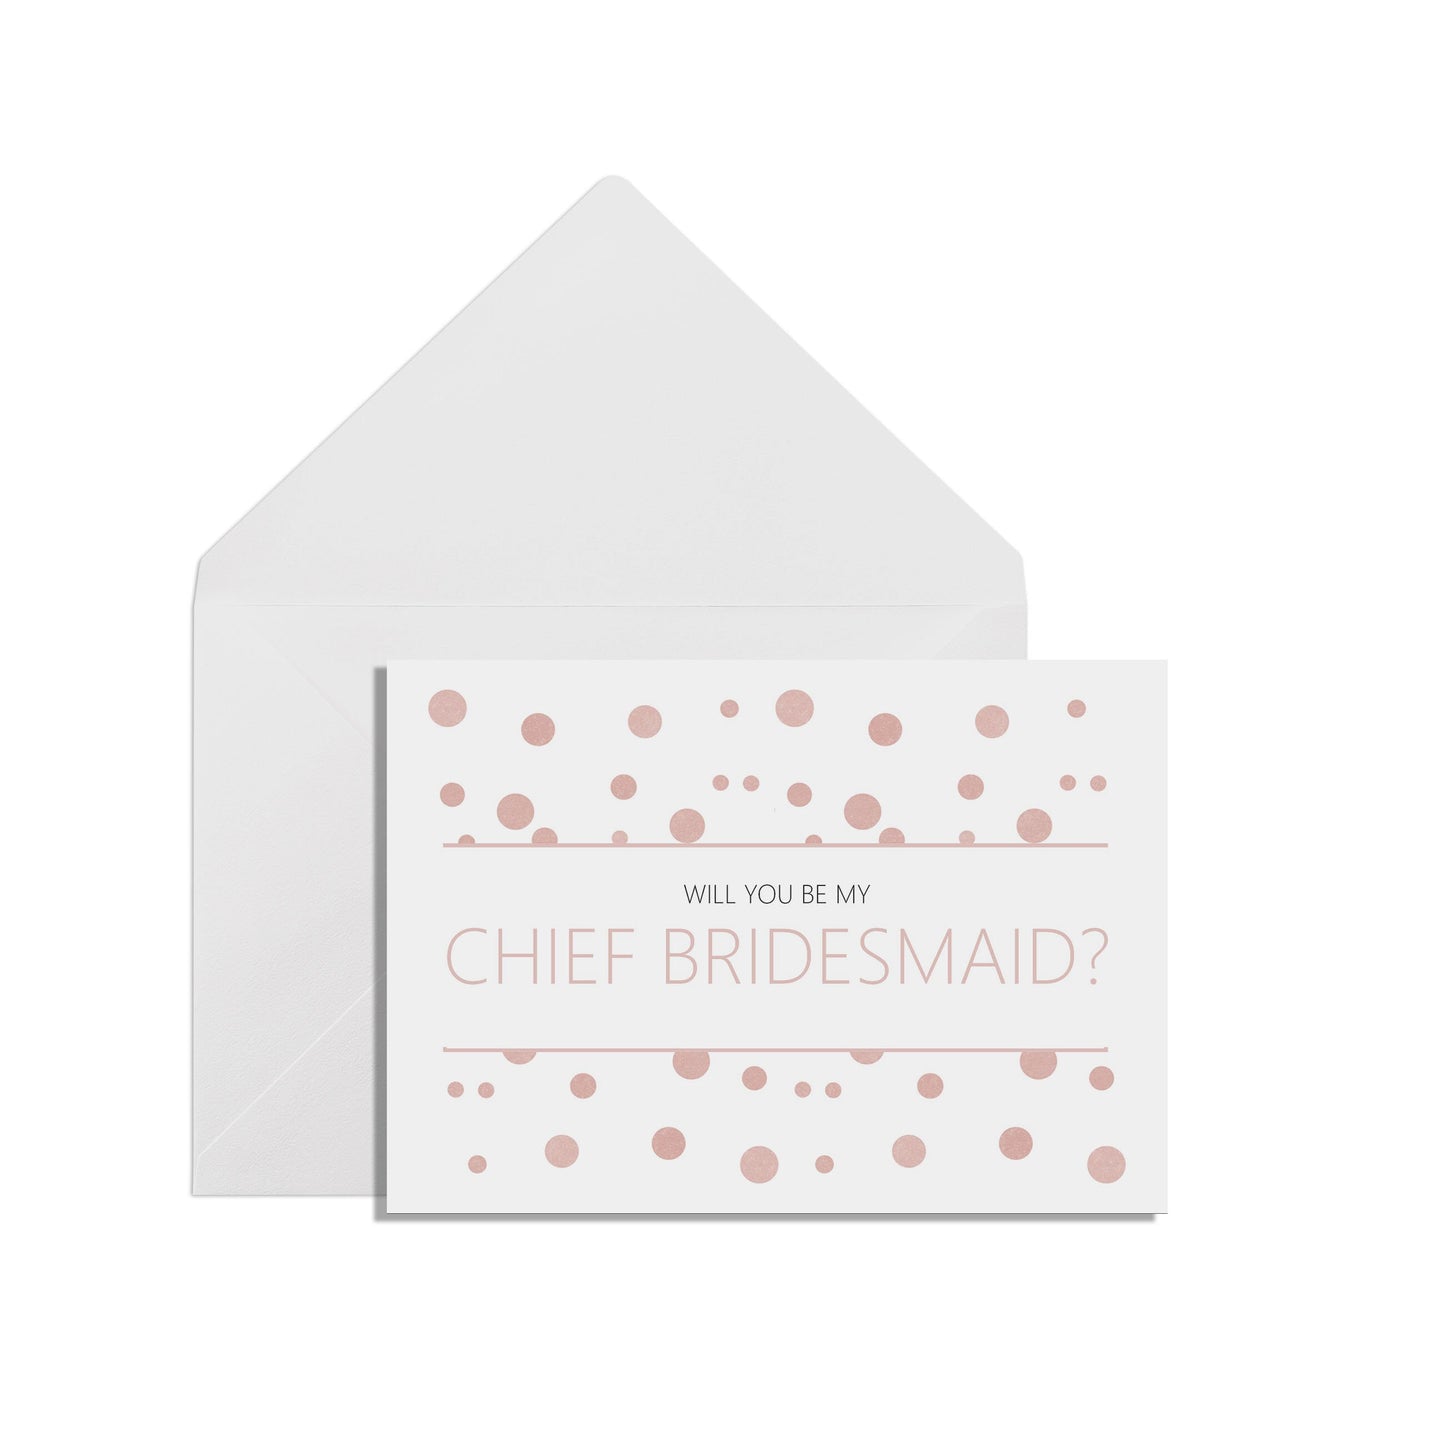 Will You Be My Chief Bridesmaid? A6 Blush Confetti Wedding Proposal Card With White Envelope